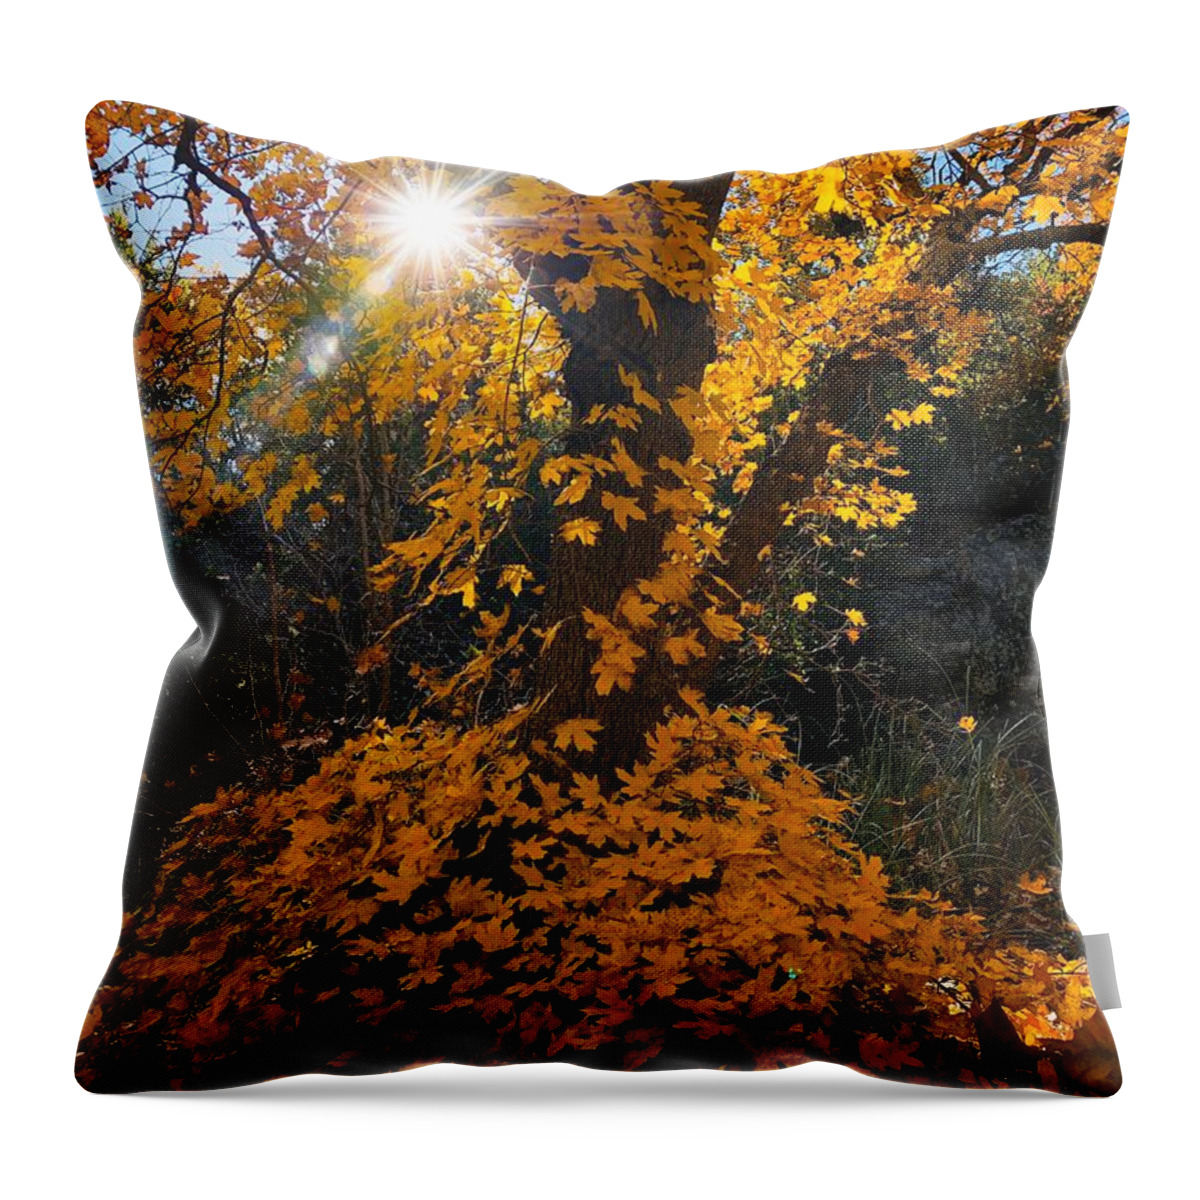 Autumn Throw Pillow featuring the photograph Glistening Golden Skirted Tree by Doris Aguirre